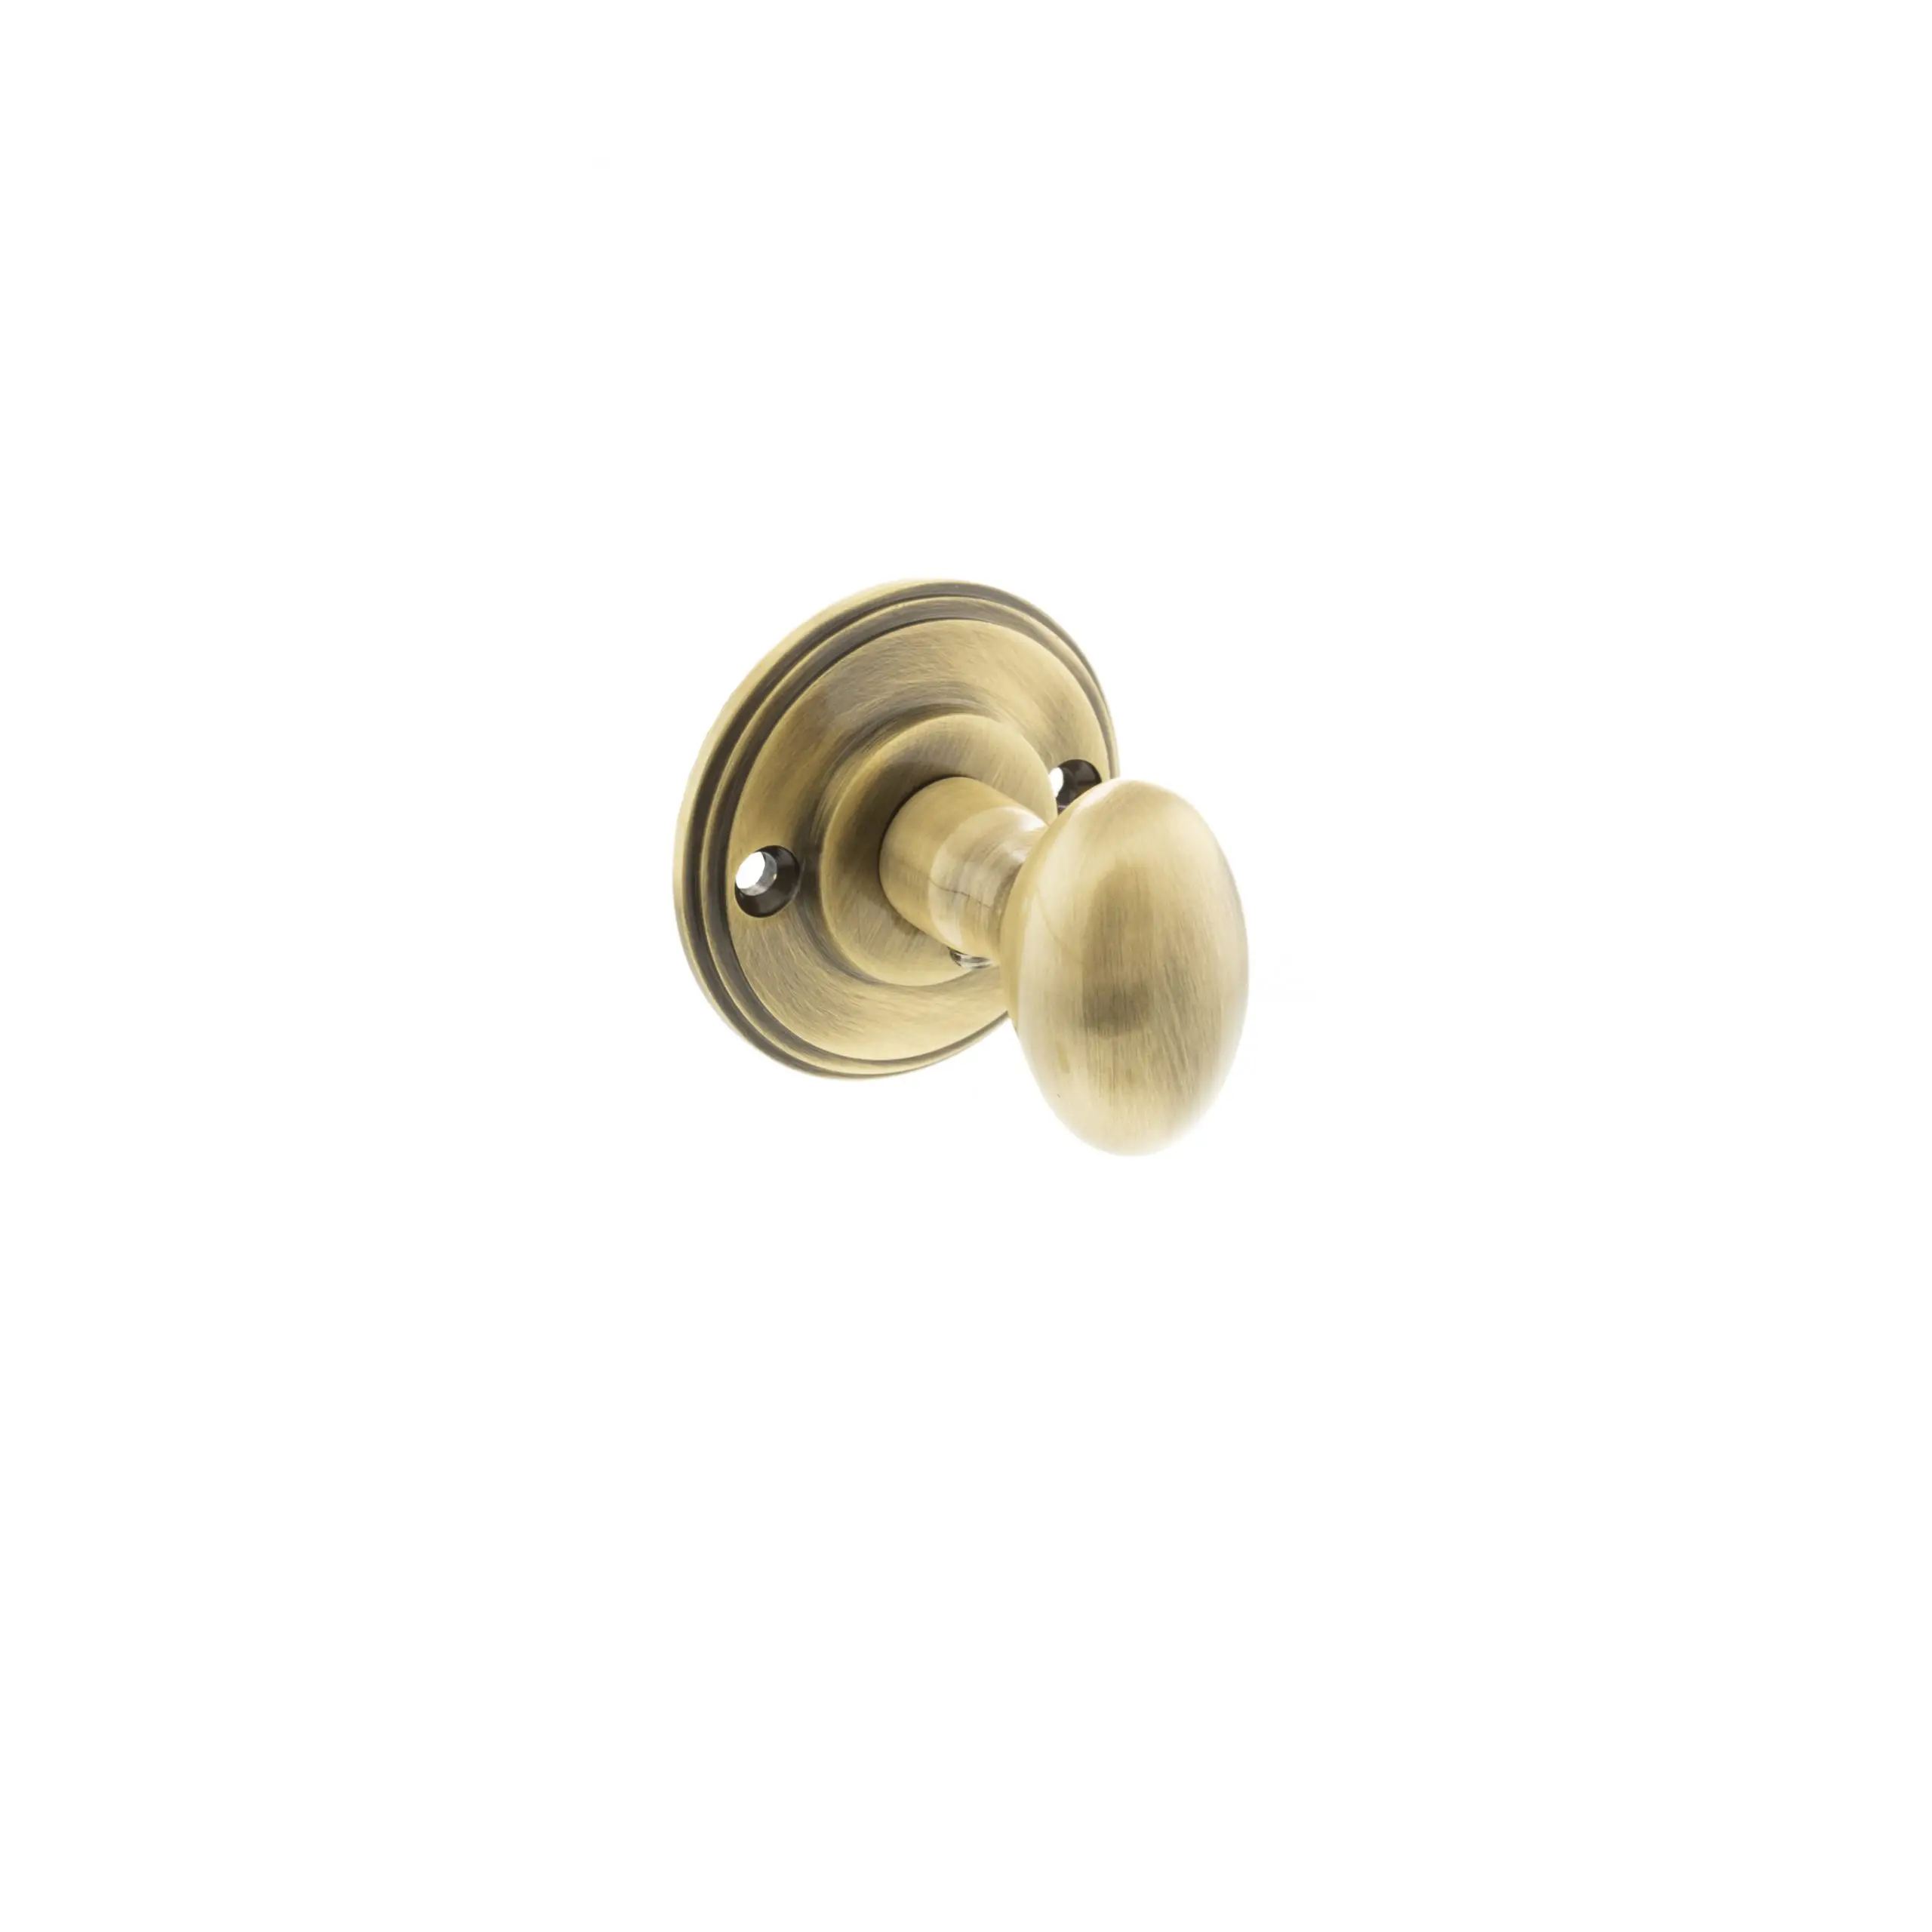 MHOWCAB_MILLHOUSE-BRASS-WC-TURN-TO-SUIT-MORTICE-KNOBS_ANTIQUE-BRASS_1_HR-scaled.jpg